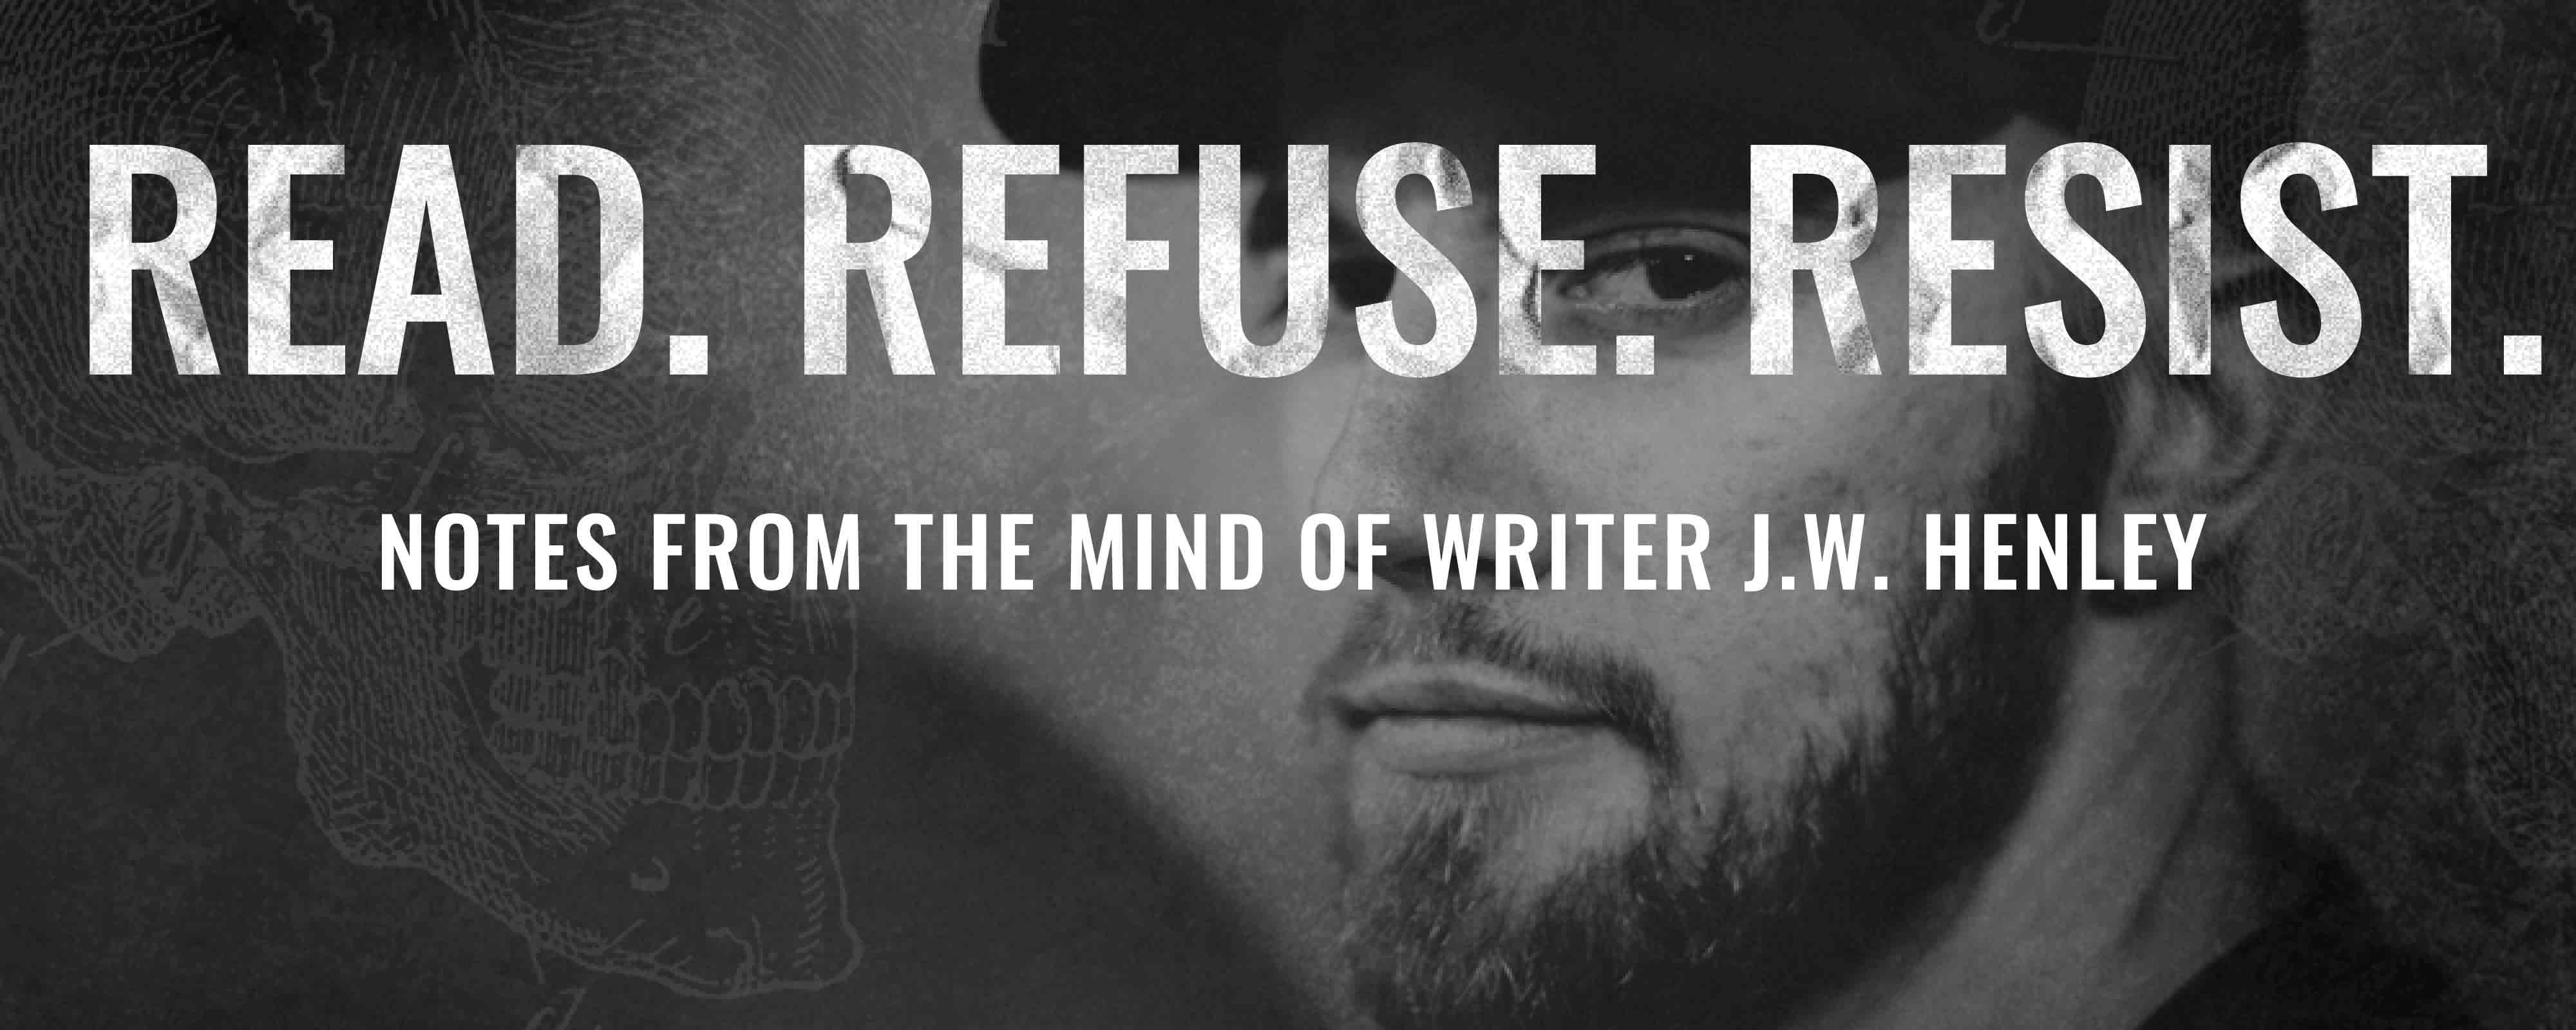 Email Newsletter Design - Read Refuse Resist, Notes From The Mind Of Joe Henley